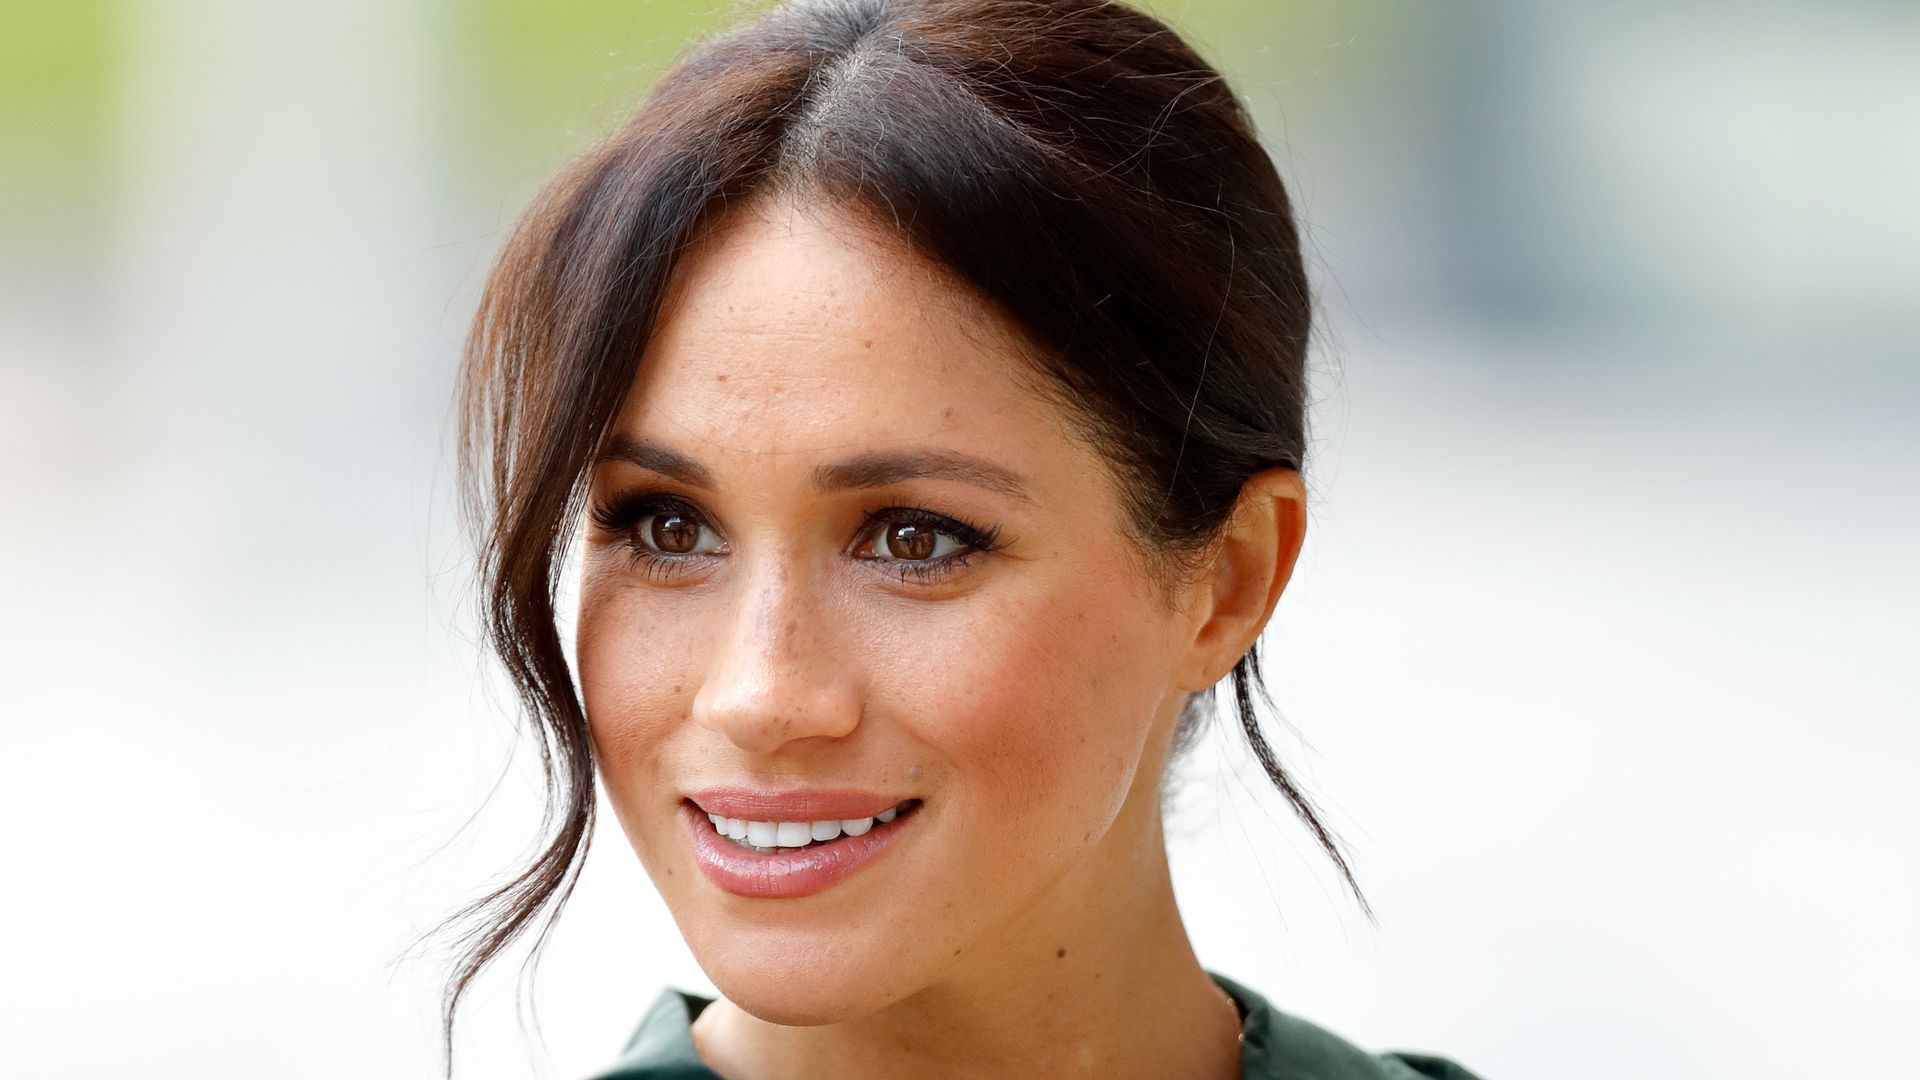 Meghan Markle's most treasured necklace made this brand go beyond viral